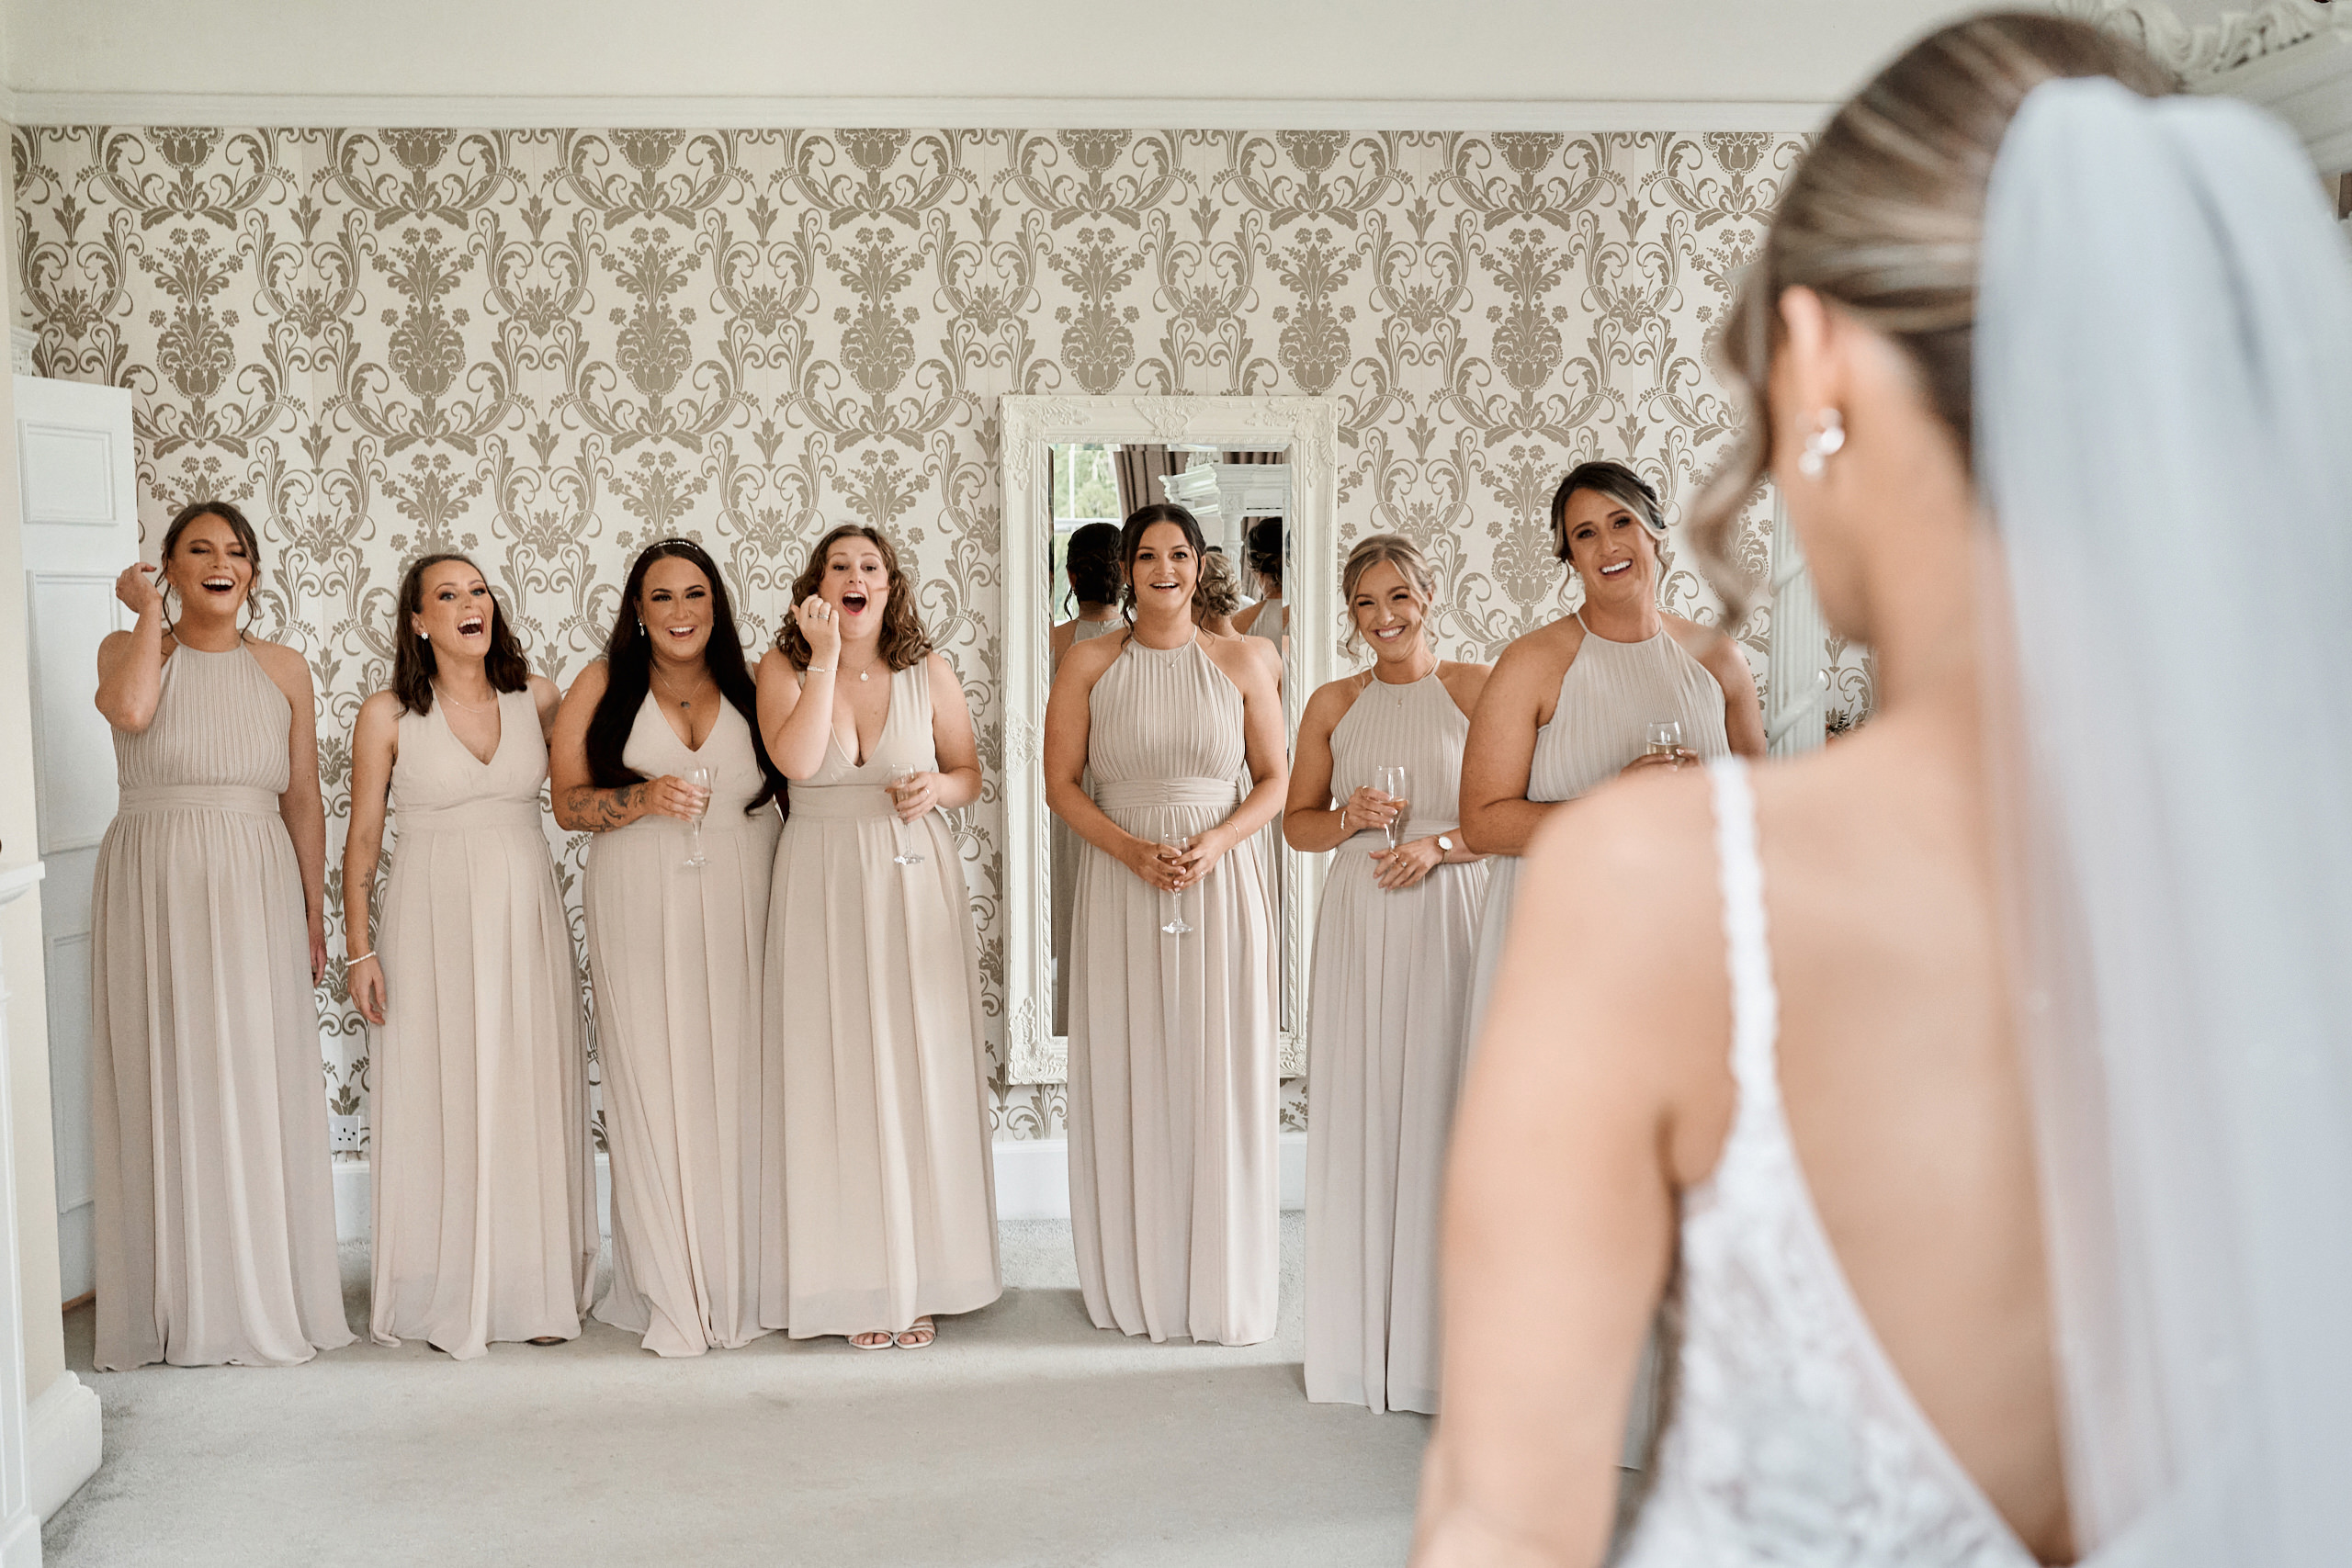 Bridesmaids looking at each other in the mirror.